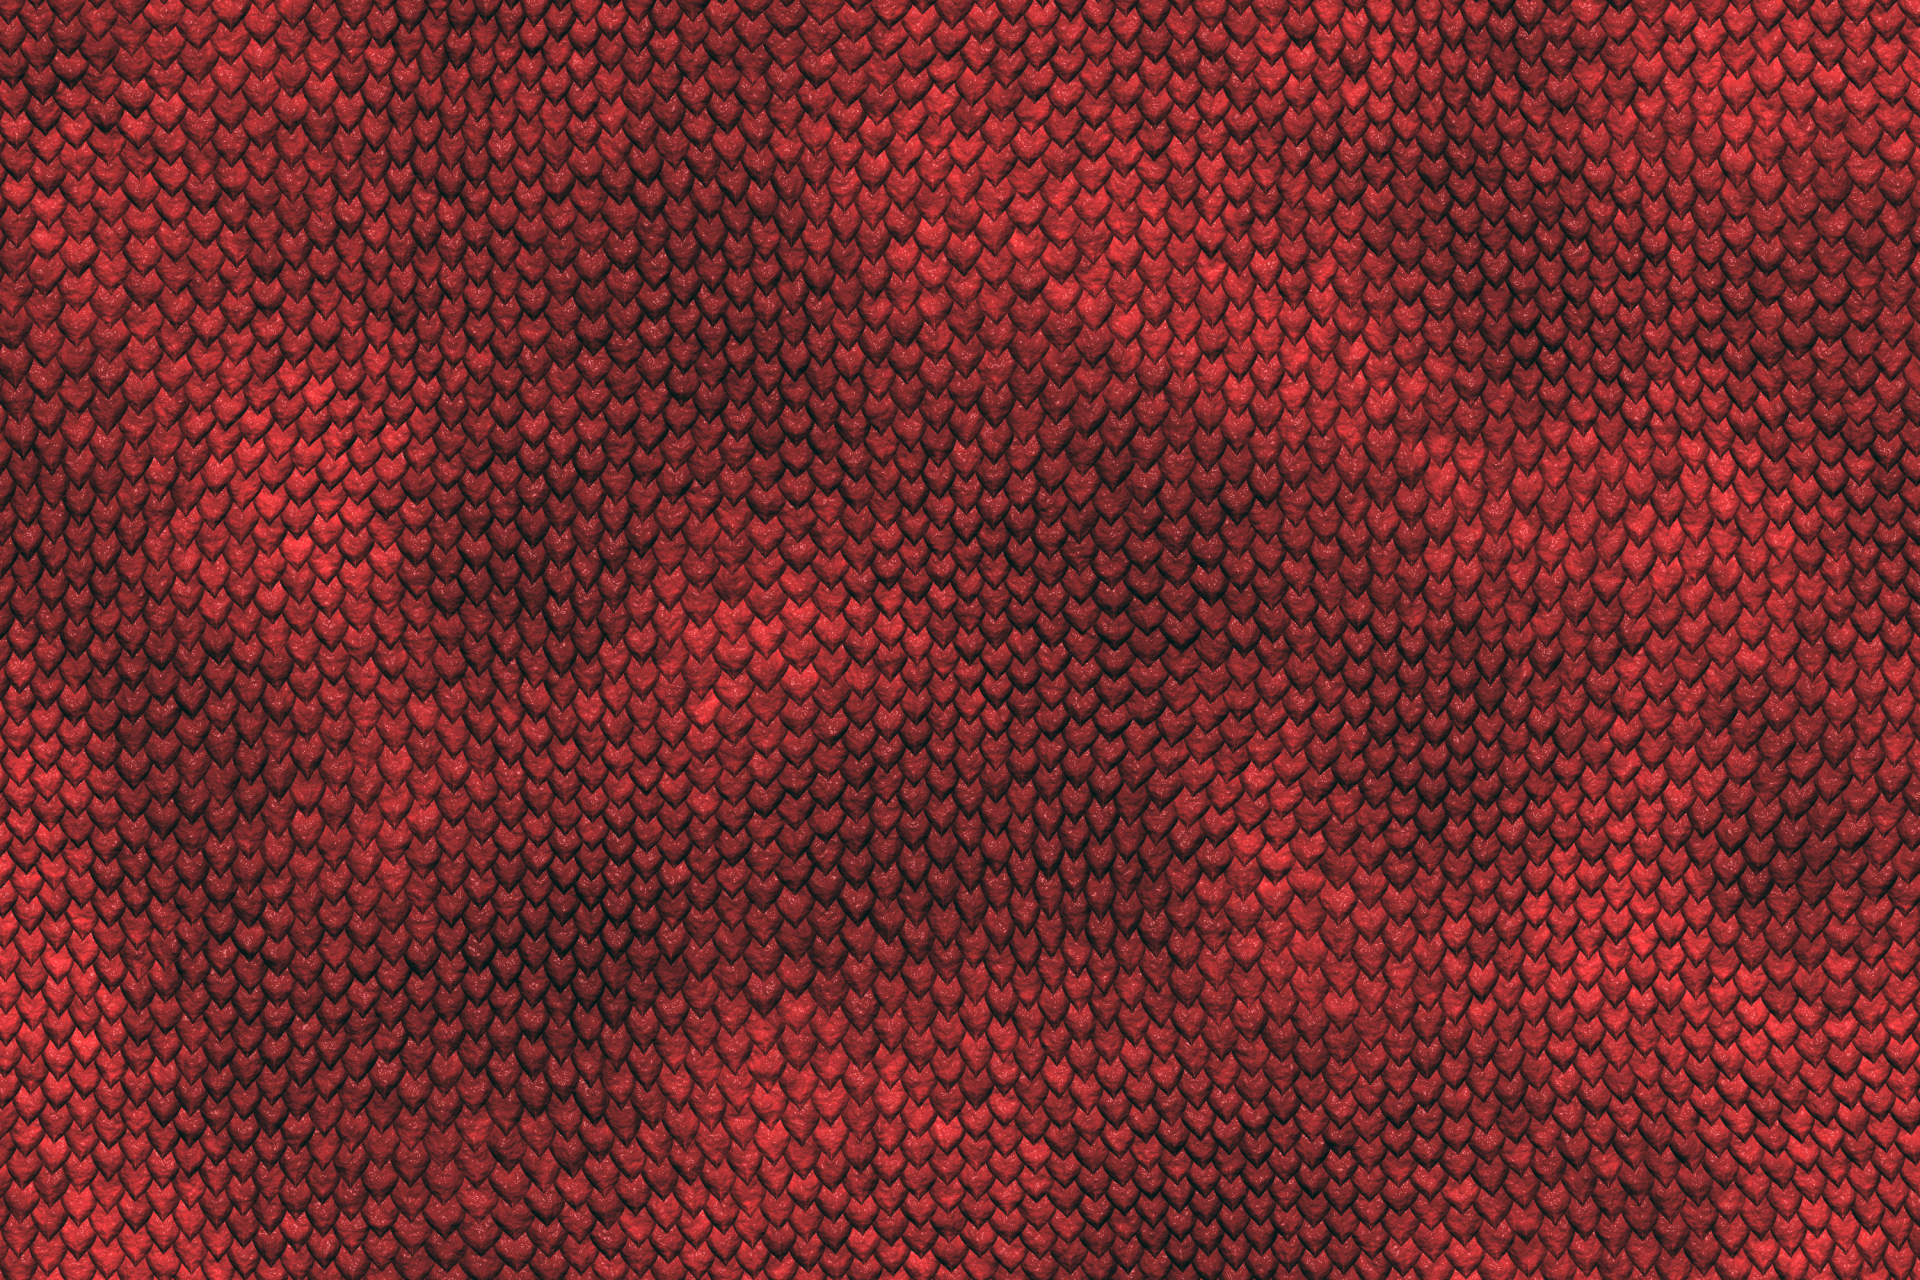 Scales Texture Minimalism Simple Background 1920x1280